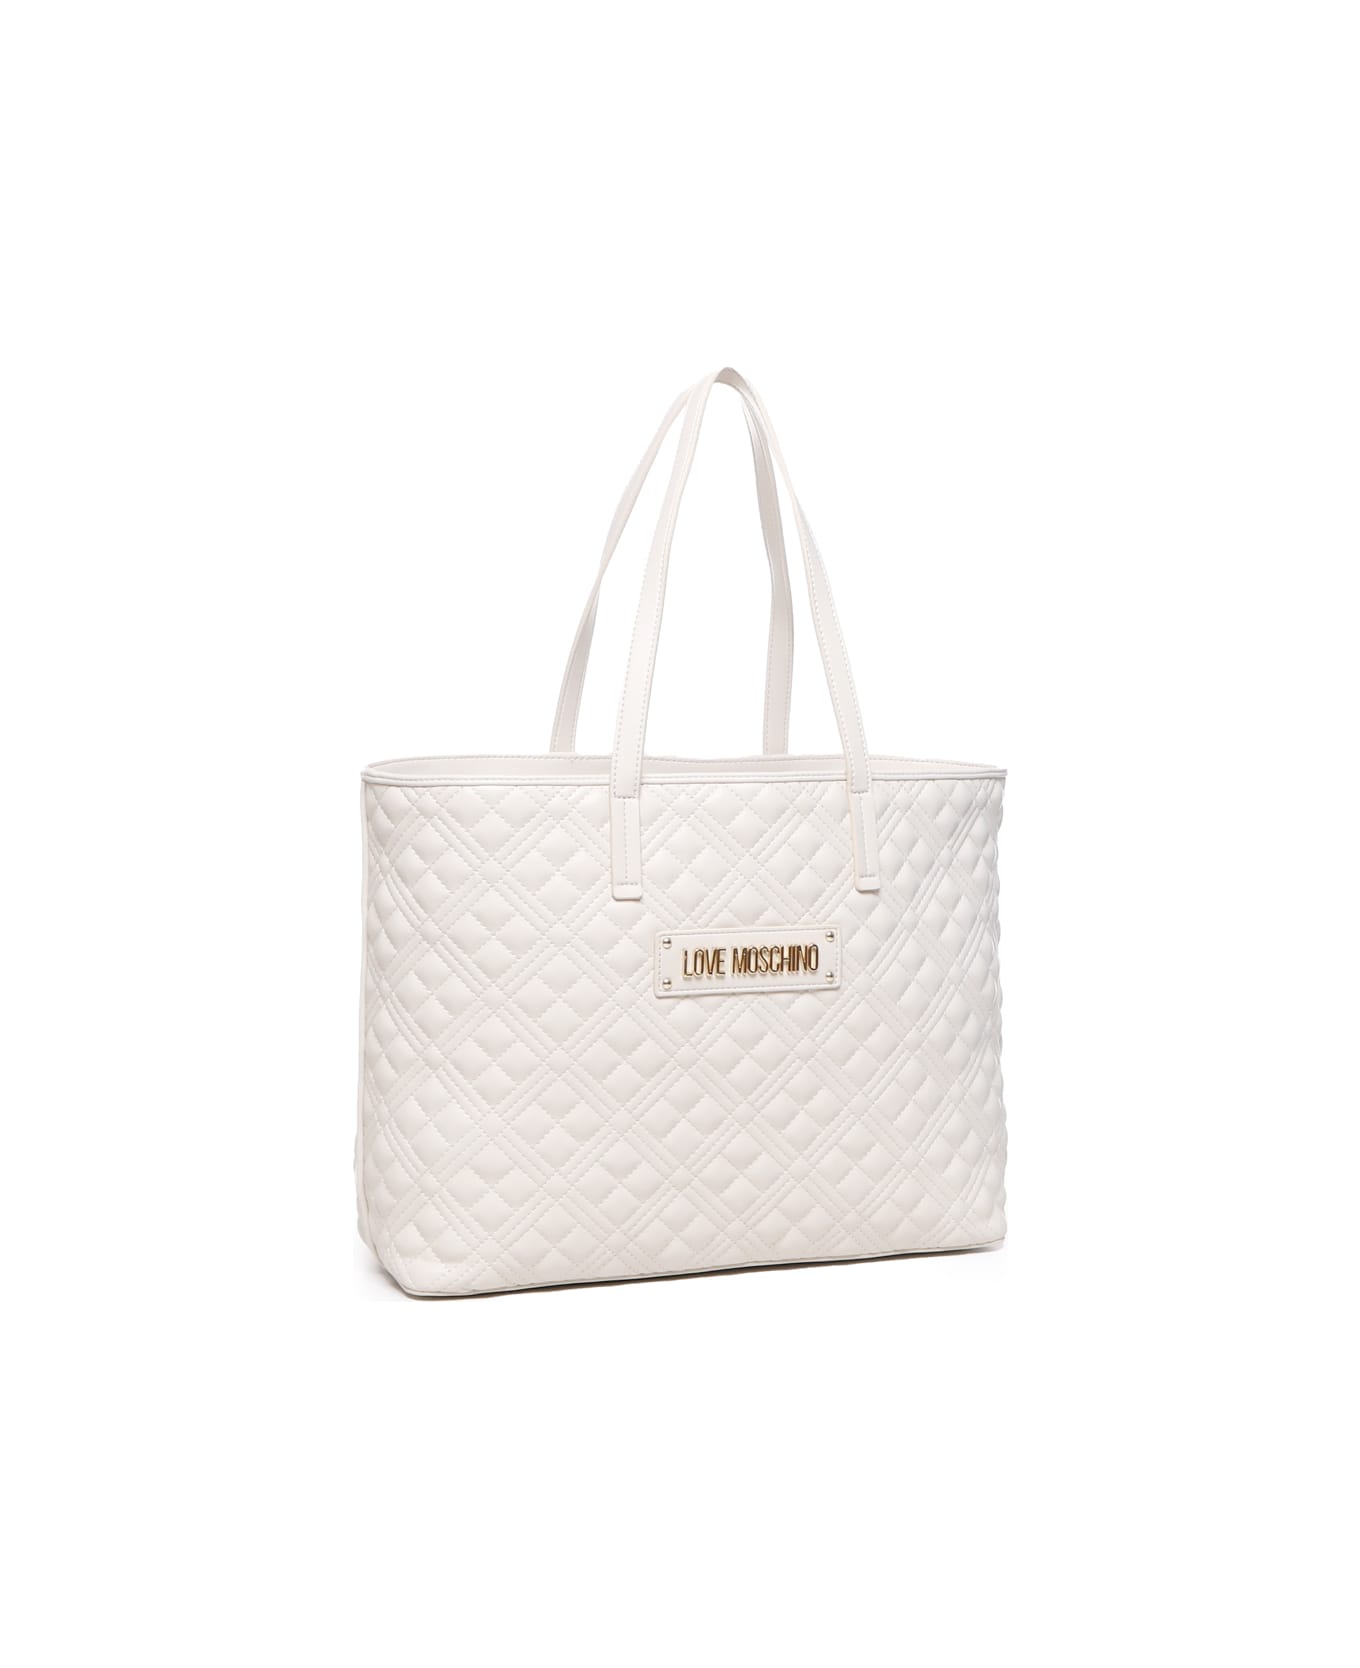 Love Moschino Quilted Shopping Bag - Ivory トートバッグ